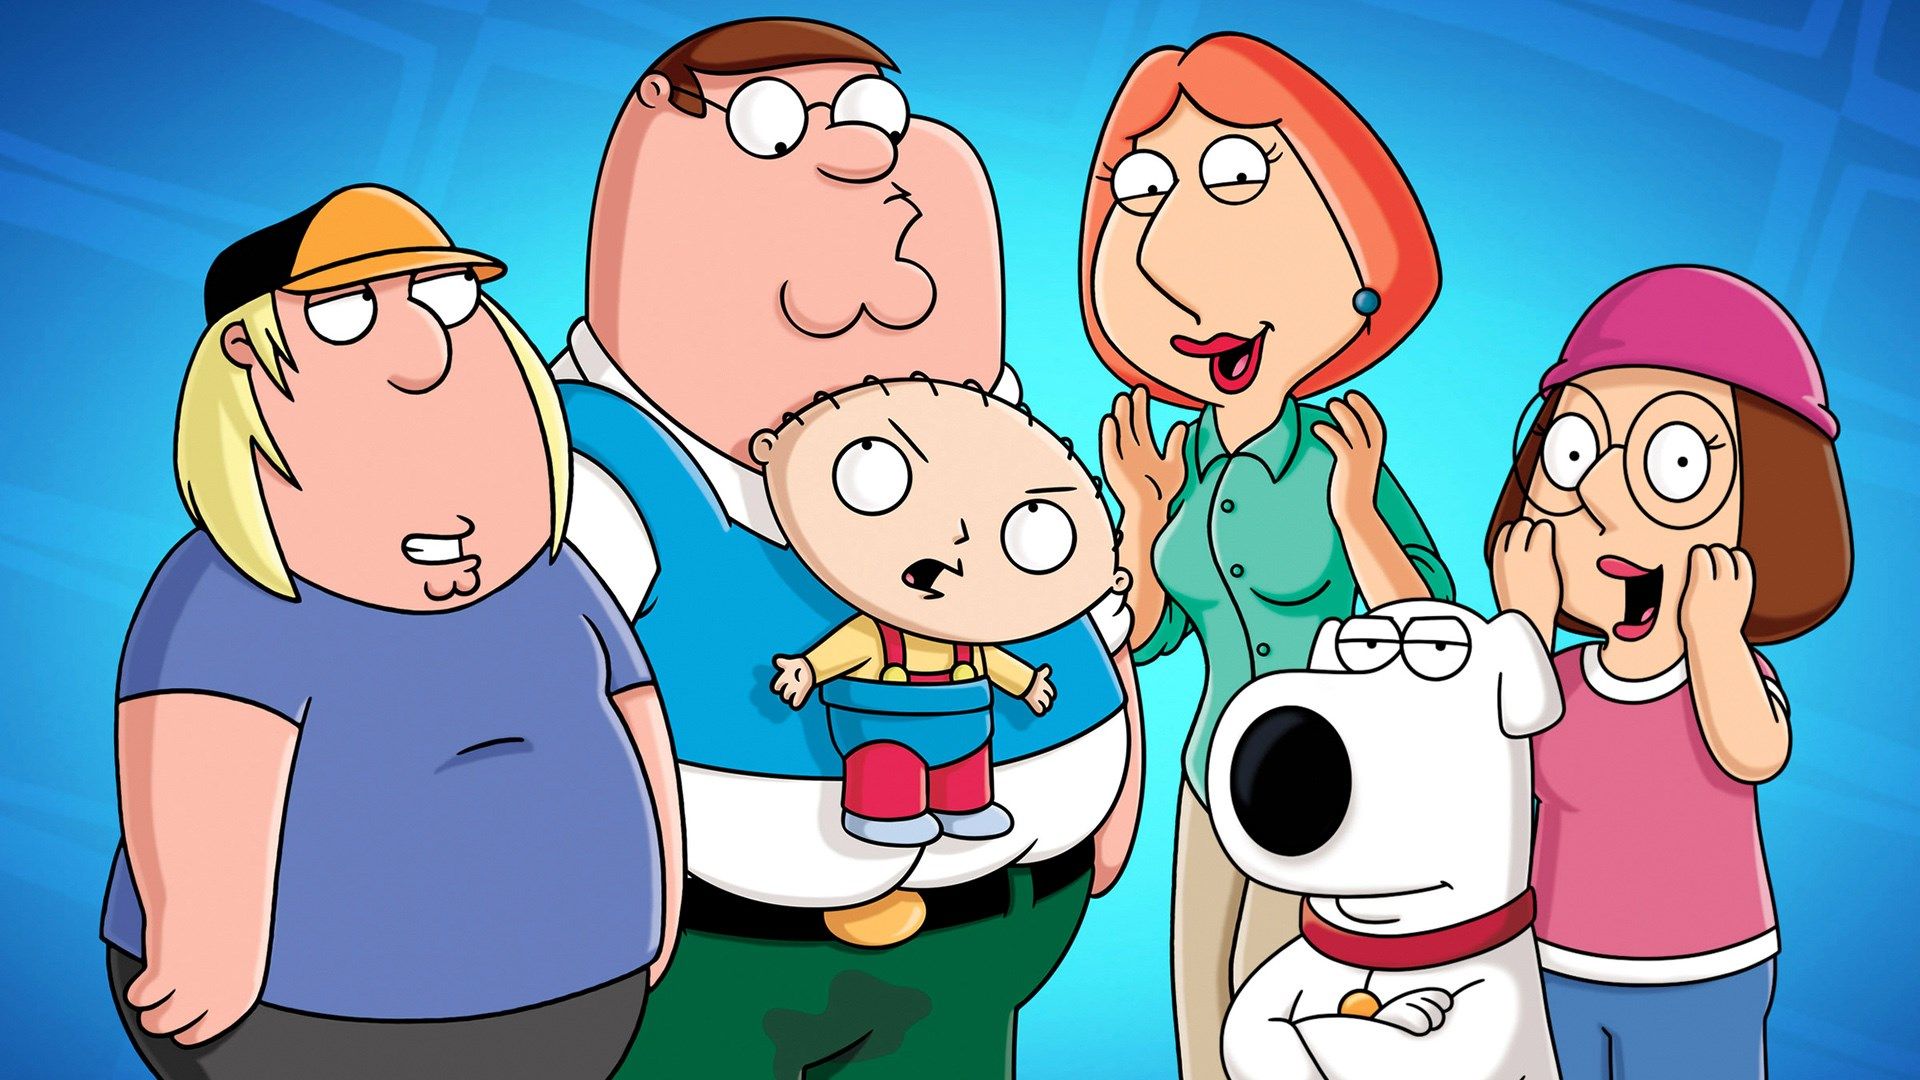 free computer wallpaper for family guy - family guy category | Family